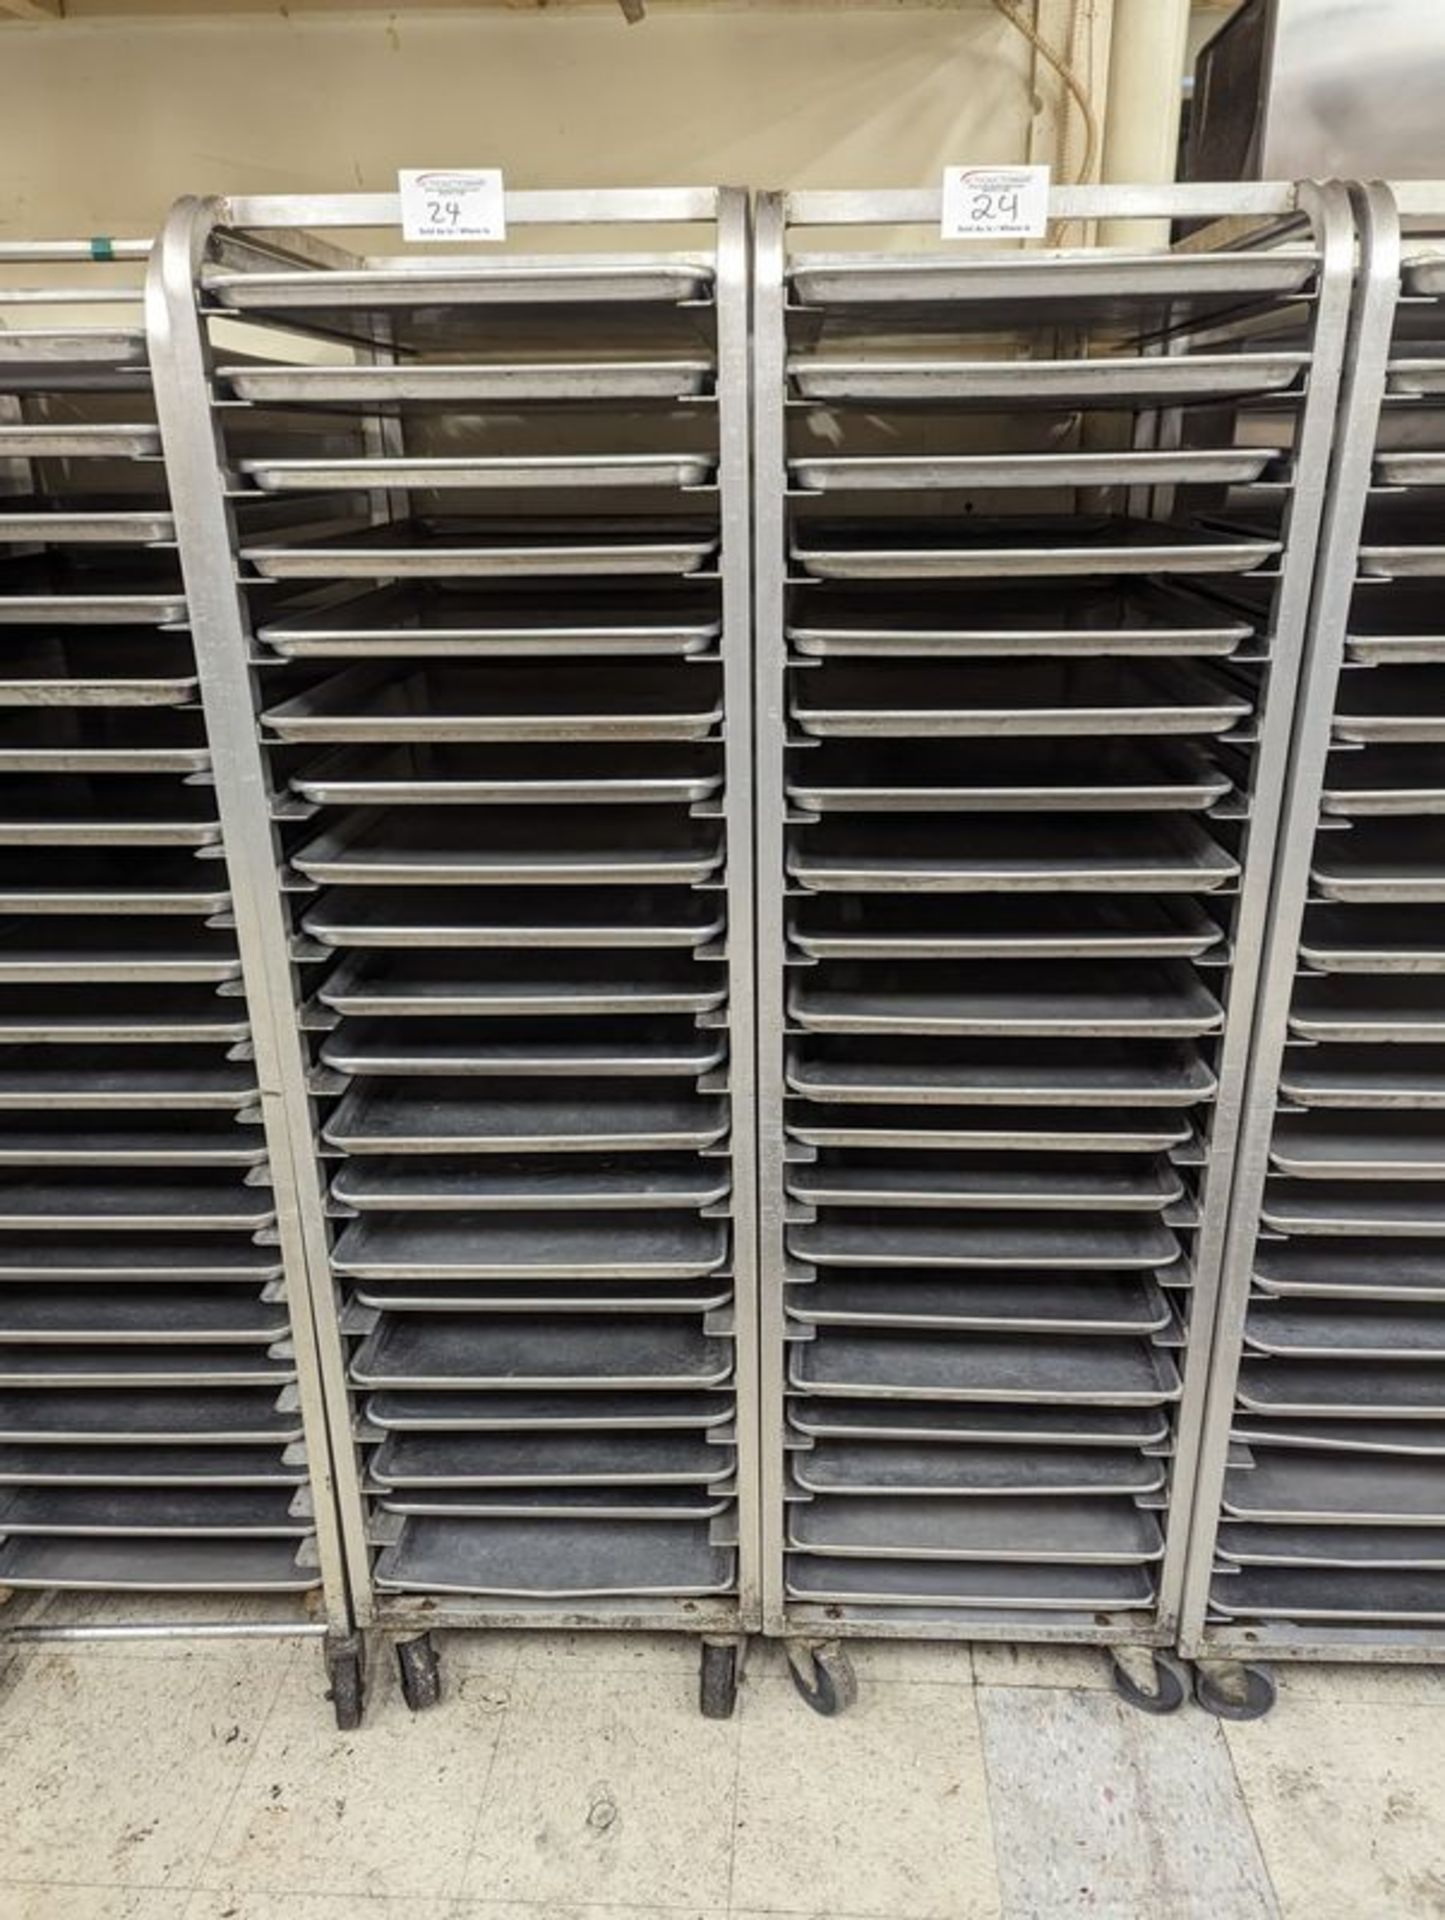 2 Bakers Racks with Trays